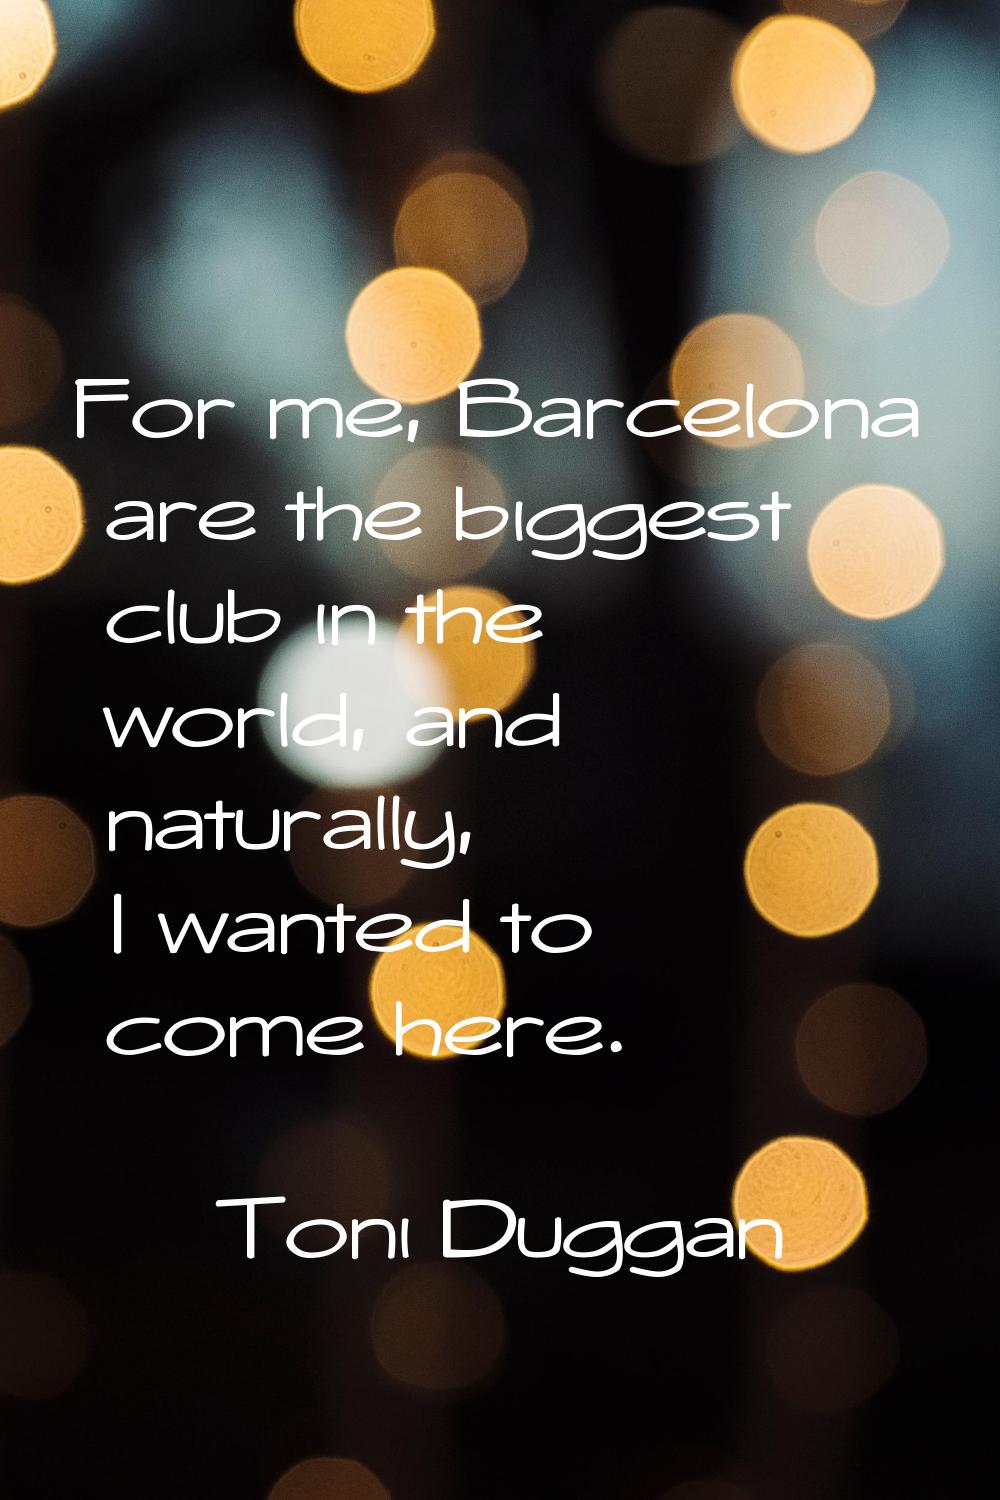 For me, Barcelona are the biggest club in the world, and naturally, I wanted to come here.